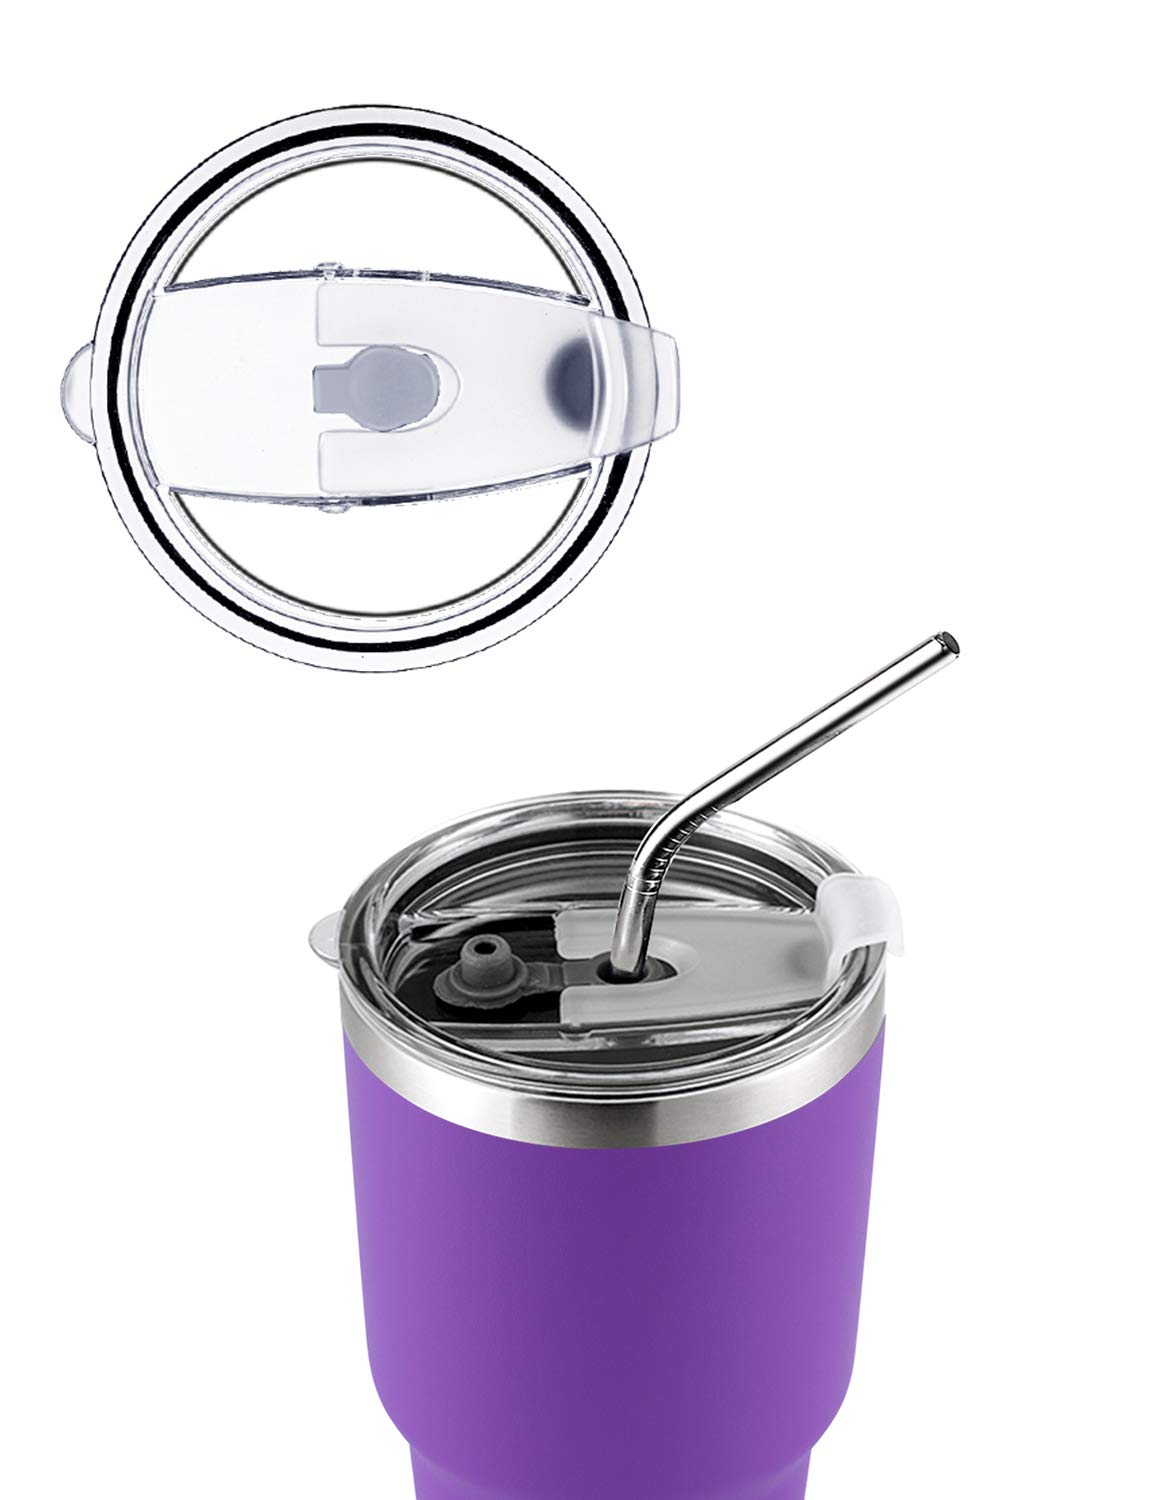 Product Image 30oz Blue Tumbler Stainless Steel Double Wall Vacuum Insulated Mug with Straw and Lid, Cleaning Brush for Cold and Hot Beverages